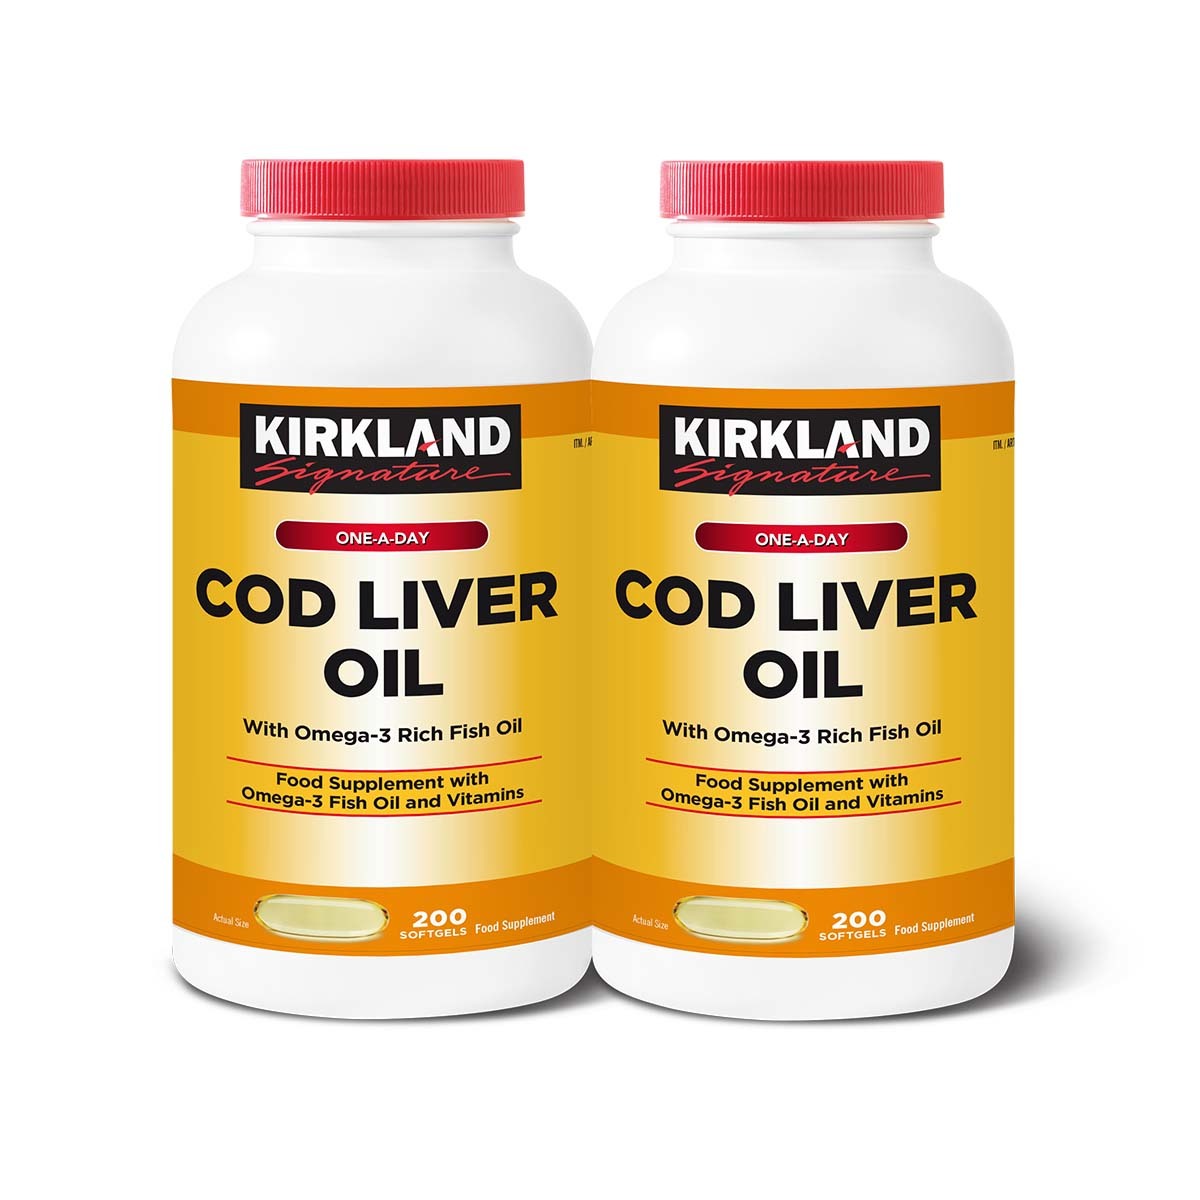 Oil benefits liver cod Mom Was